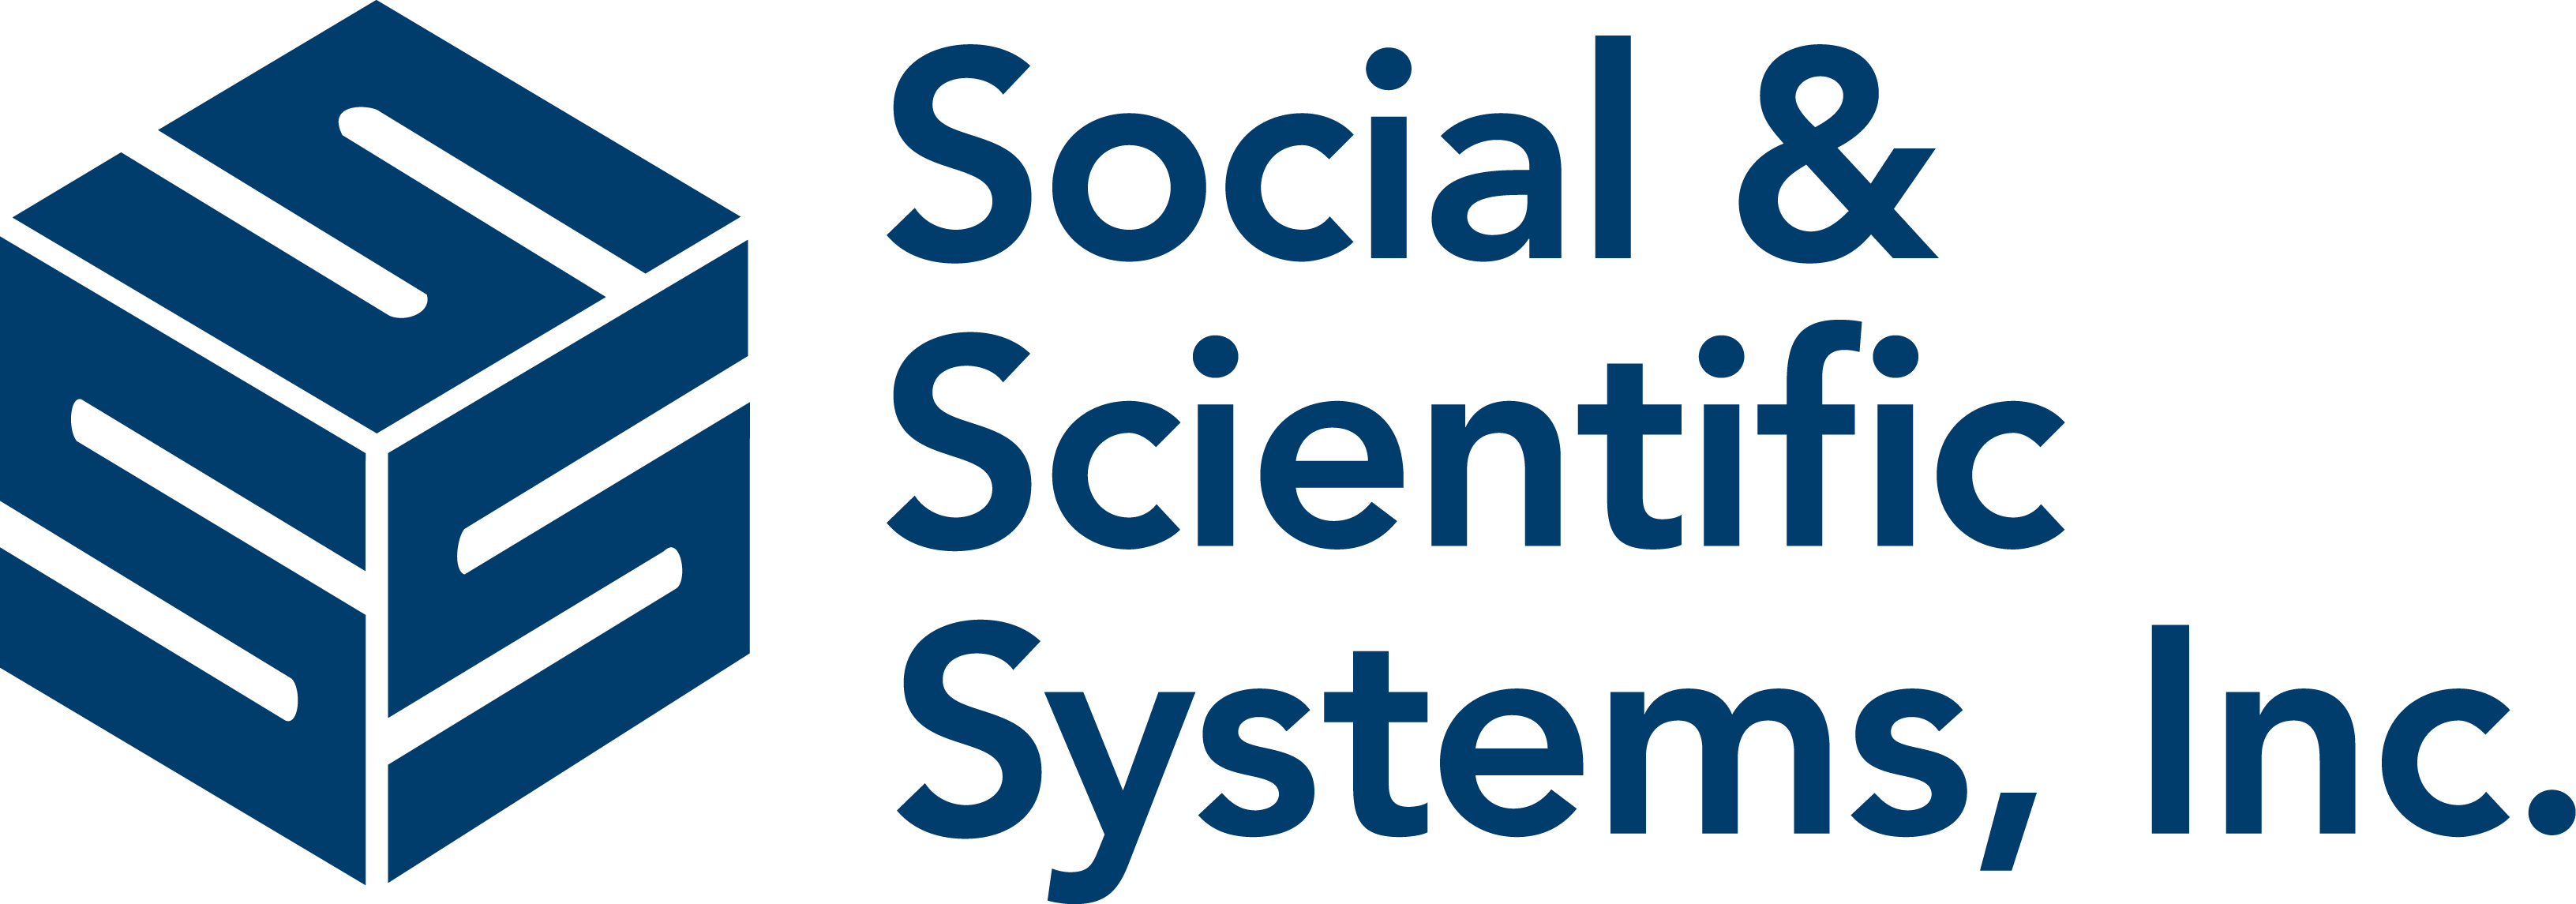 Logo graphic for Social & Scientific Systems, Inc.